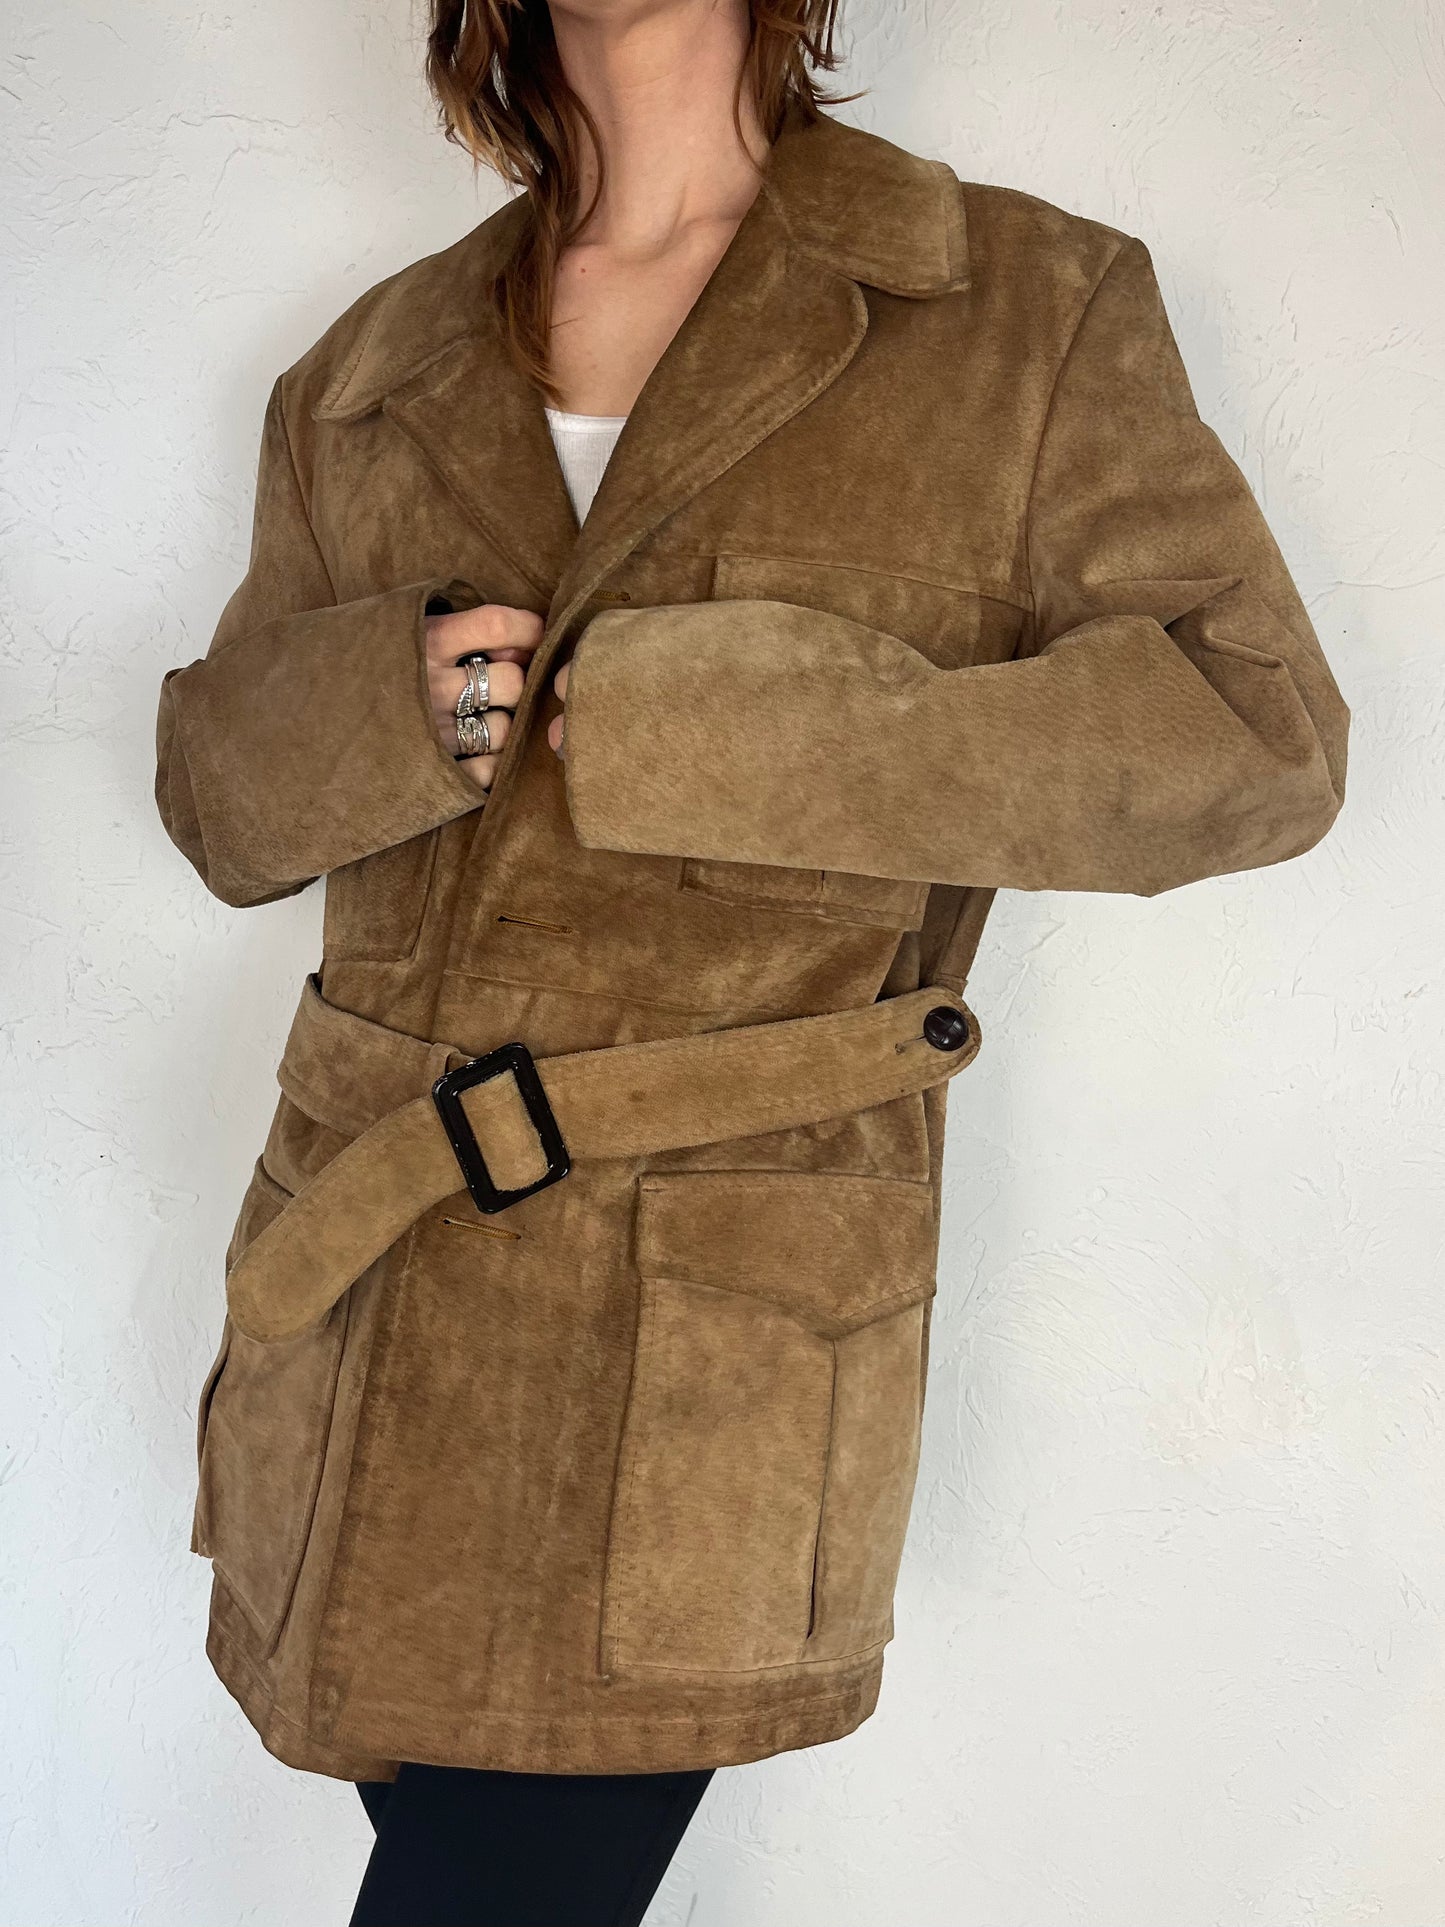 80s Thick Suede Leather Chore Jacket / Large